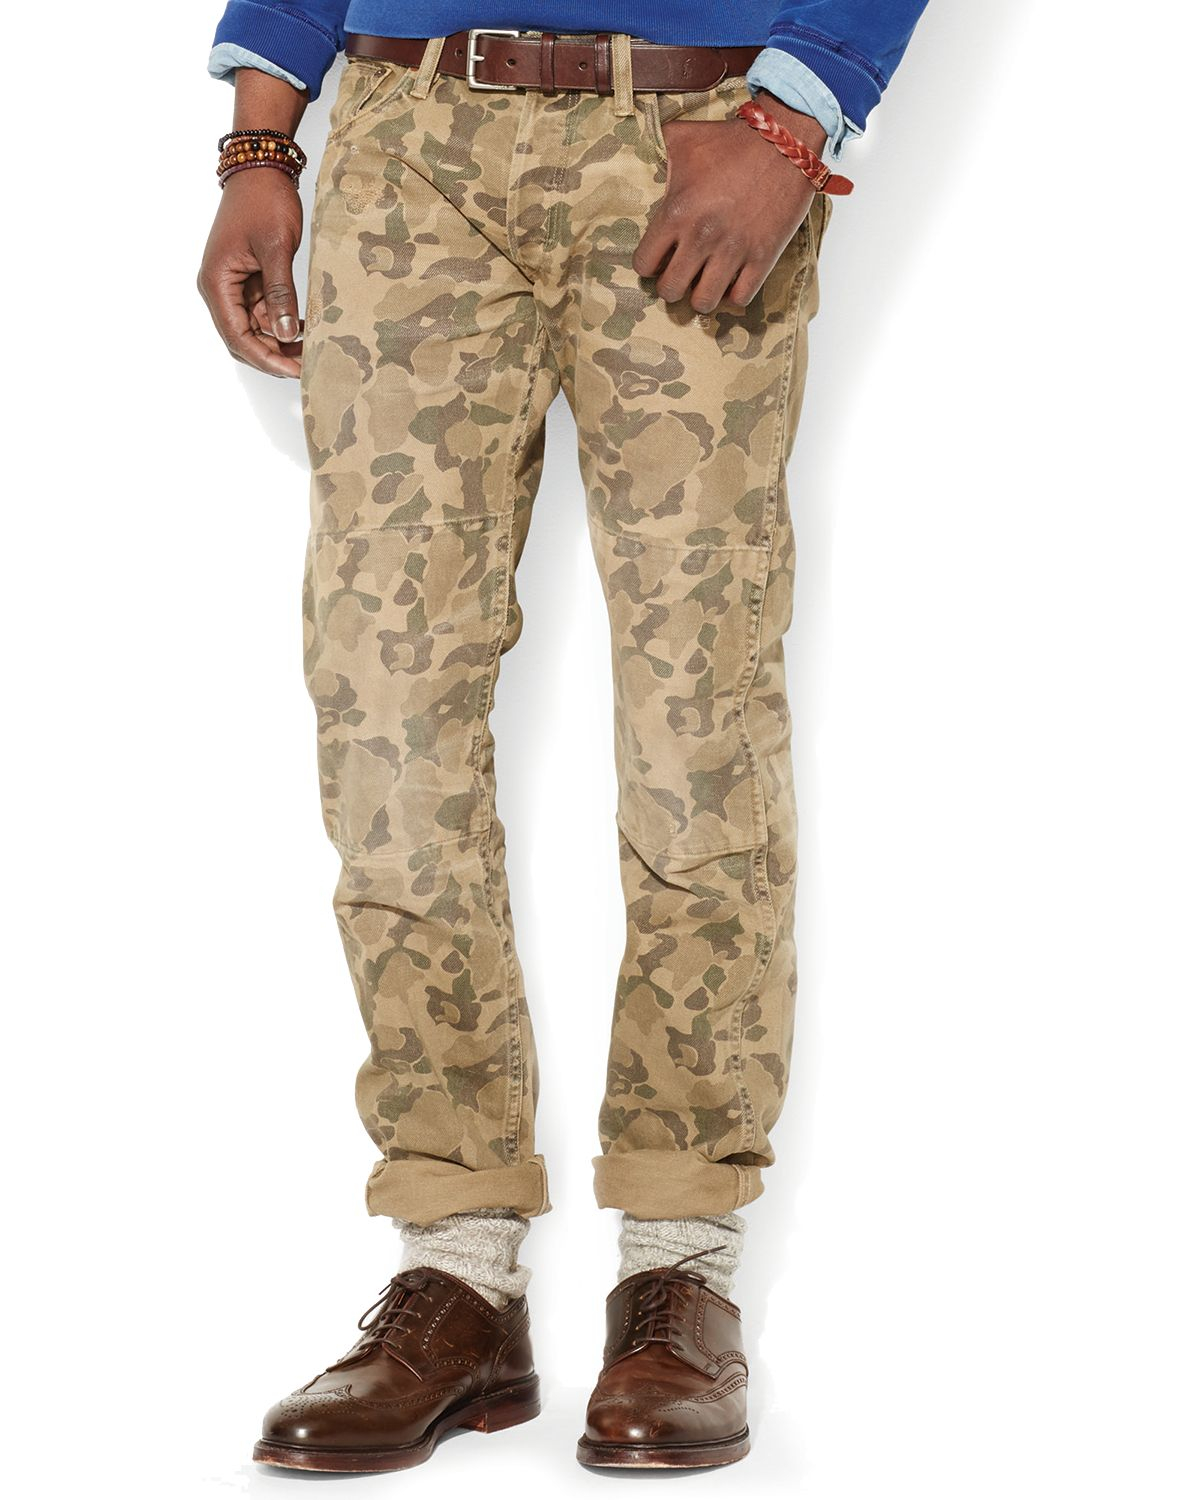 Buy > polo camouflage pants > in stock